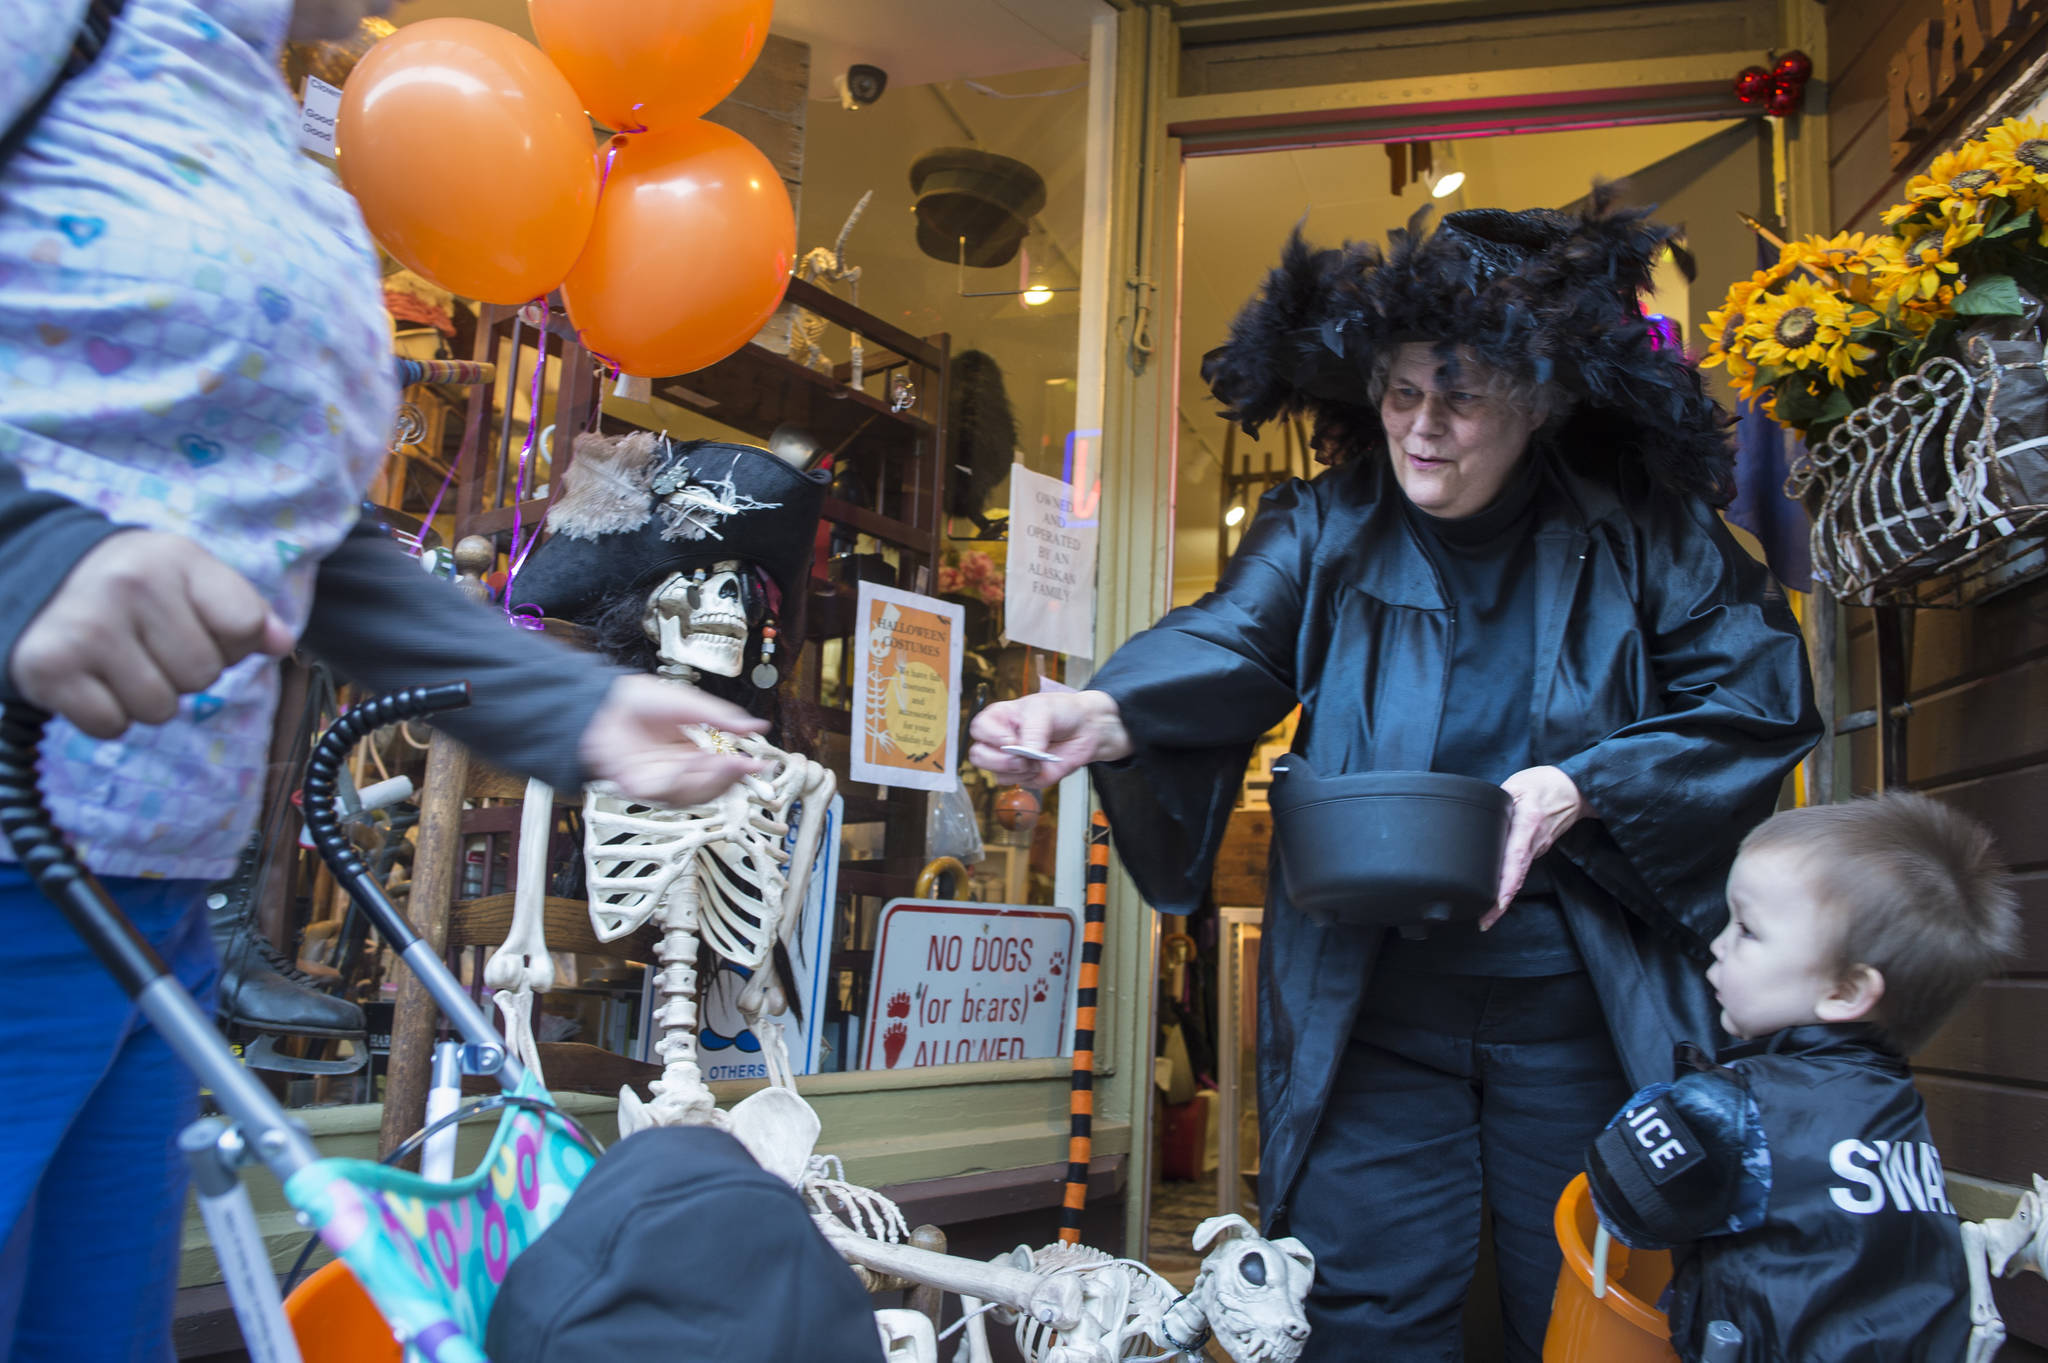 Suzanne Hudson, owner of Nana’s Attic, hands out candy to visiting children and their parents on Wednesday, Oct. 31, 2018. For the fourth year Kindred Post has organized the Halloween celebration for trick-or-treaters. (Michael Penn | Juneau Empire)